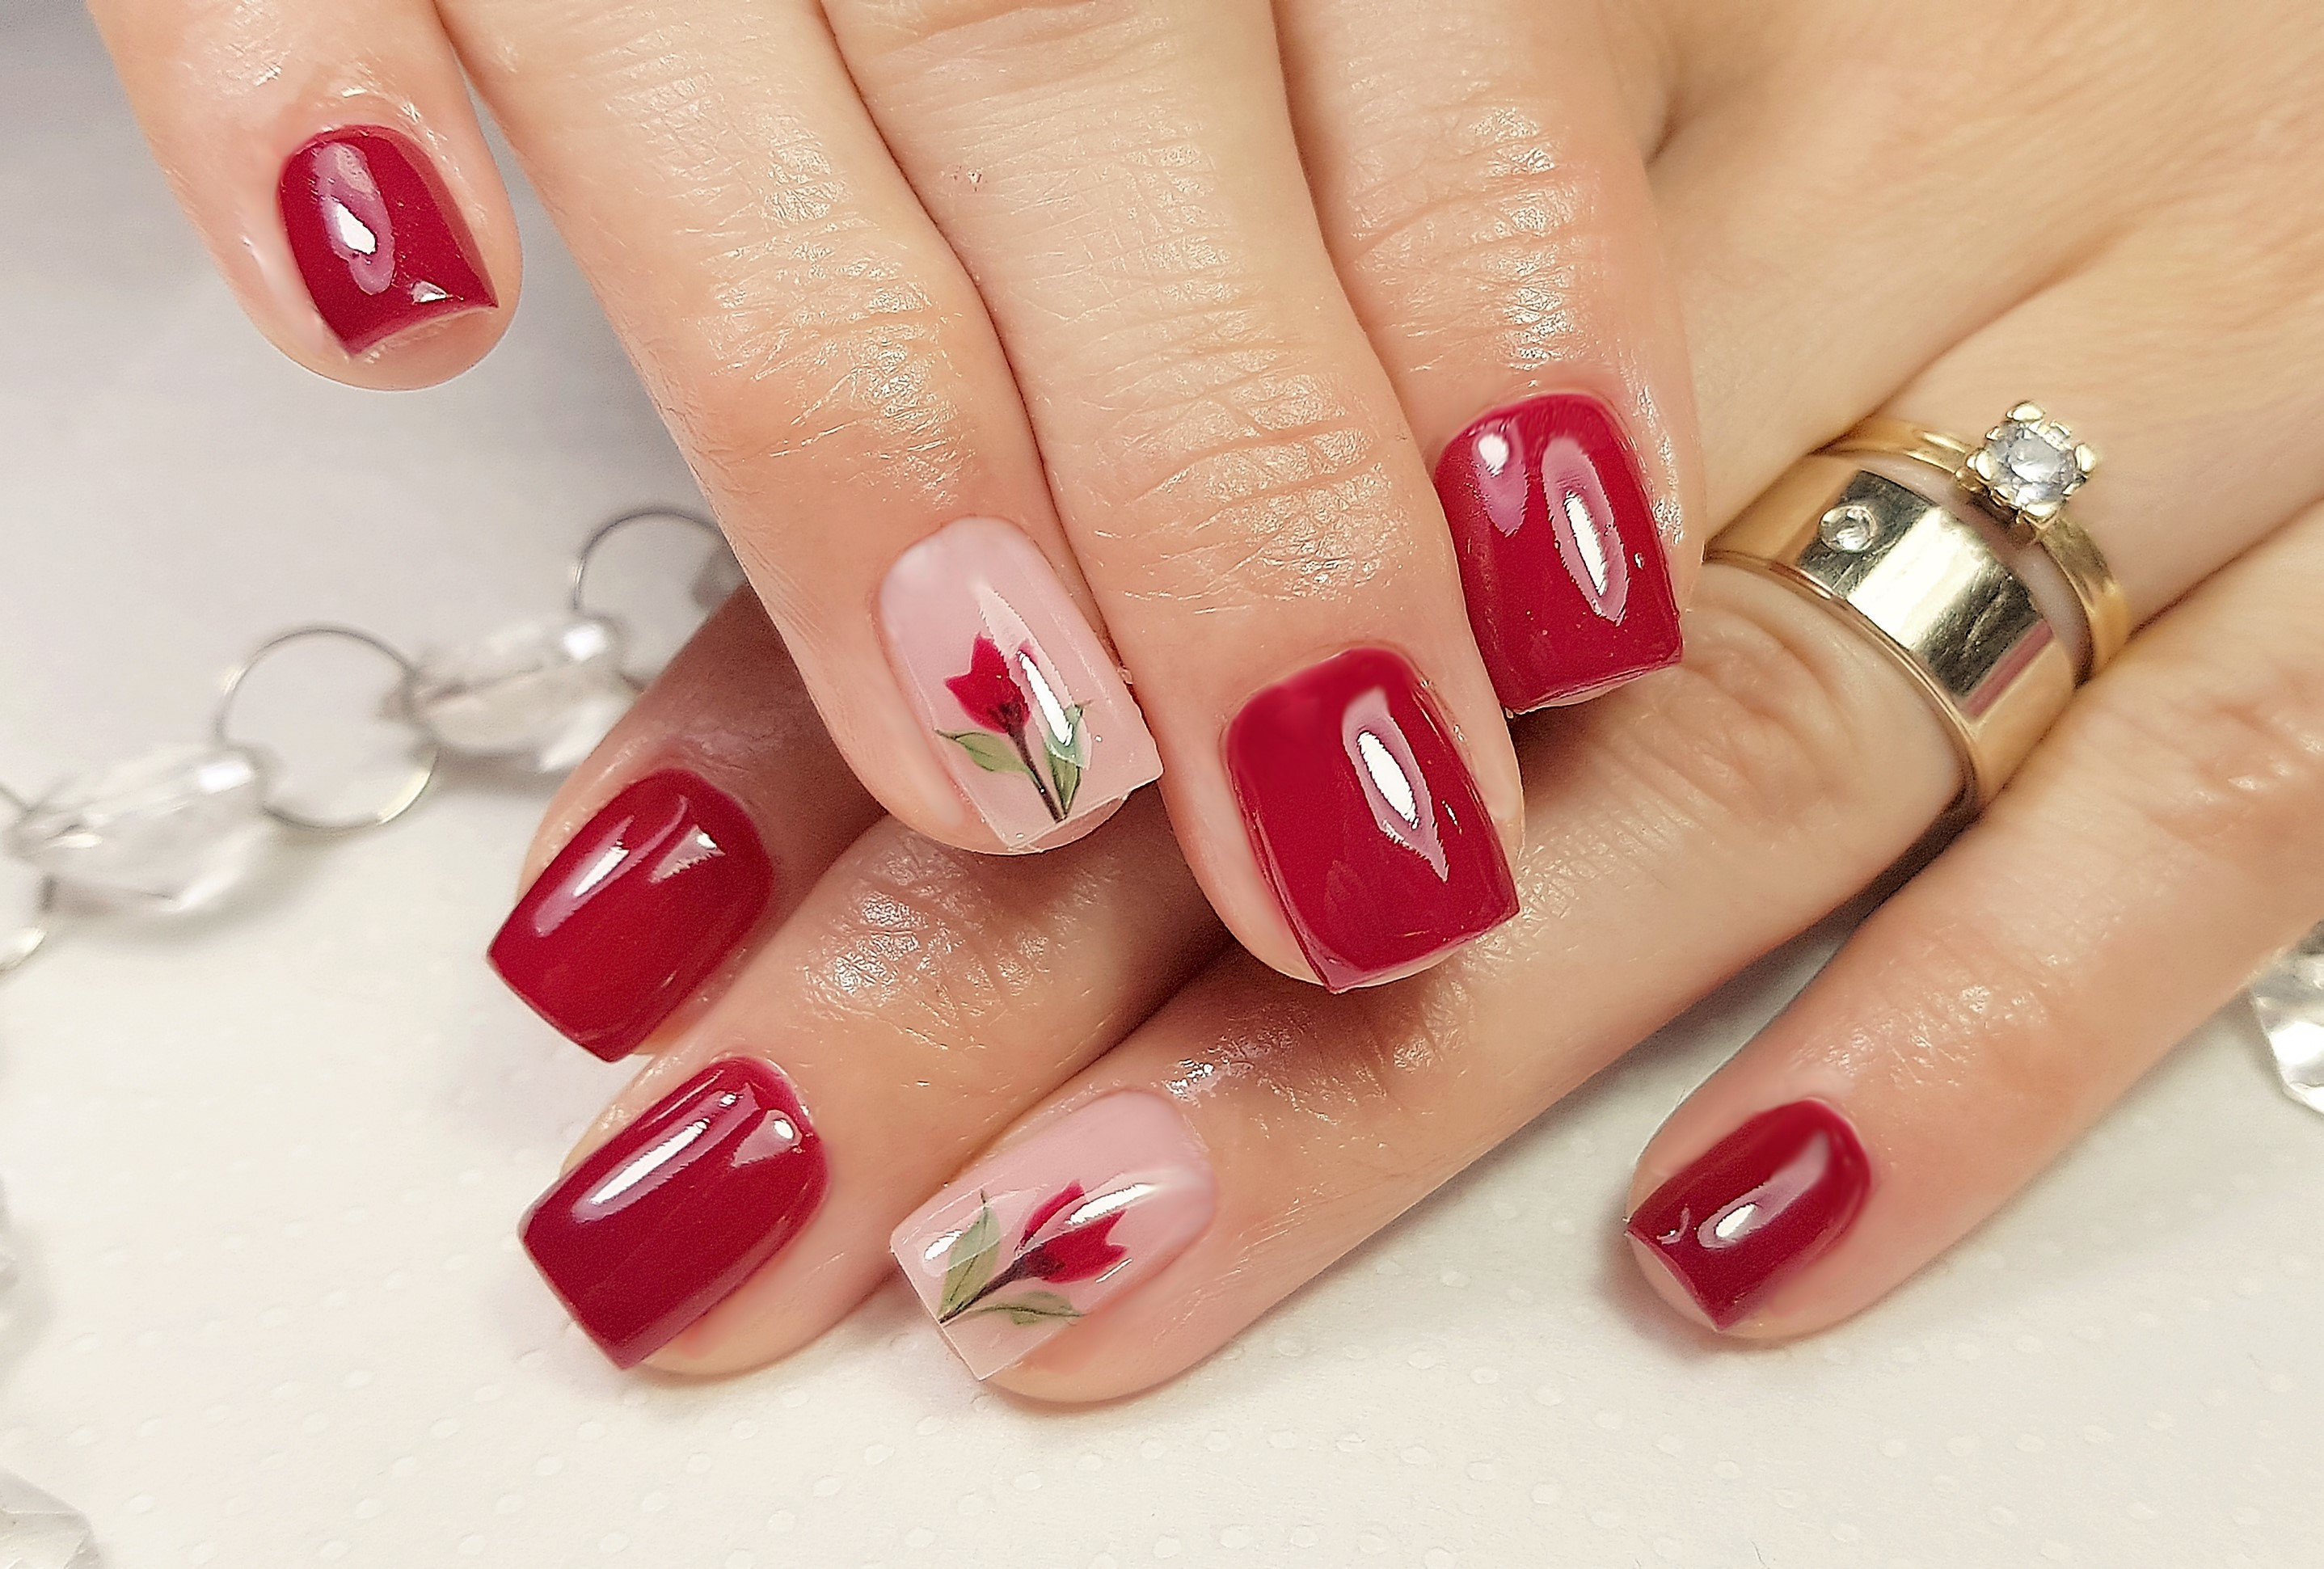 Red Nail Designs: New Twists on the Classic Look | Woman's World